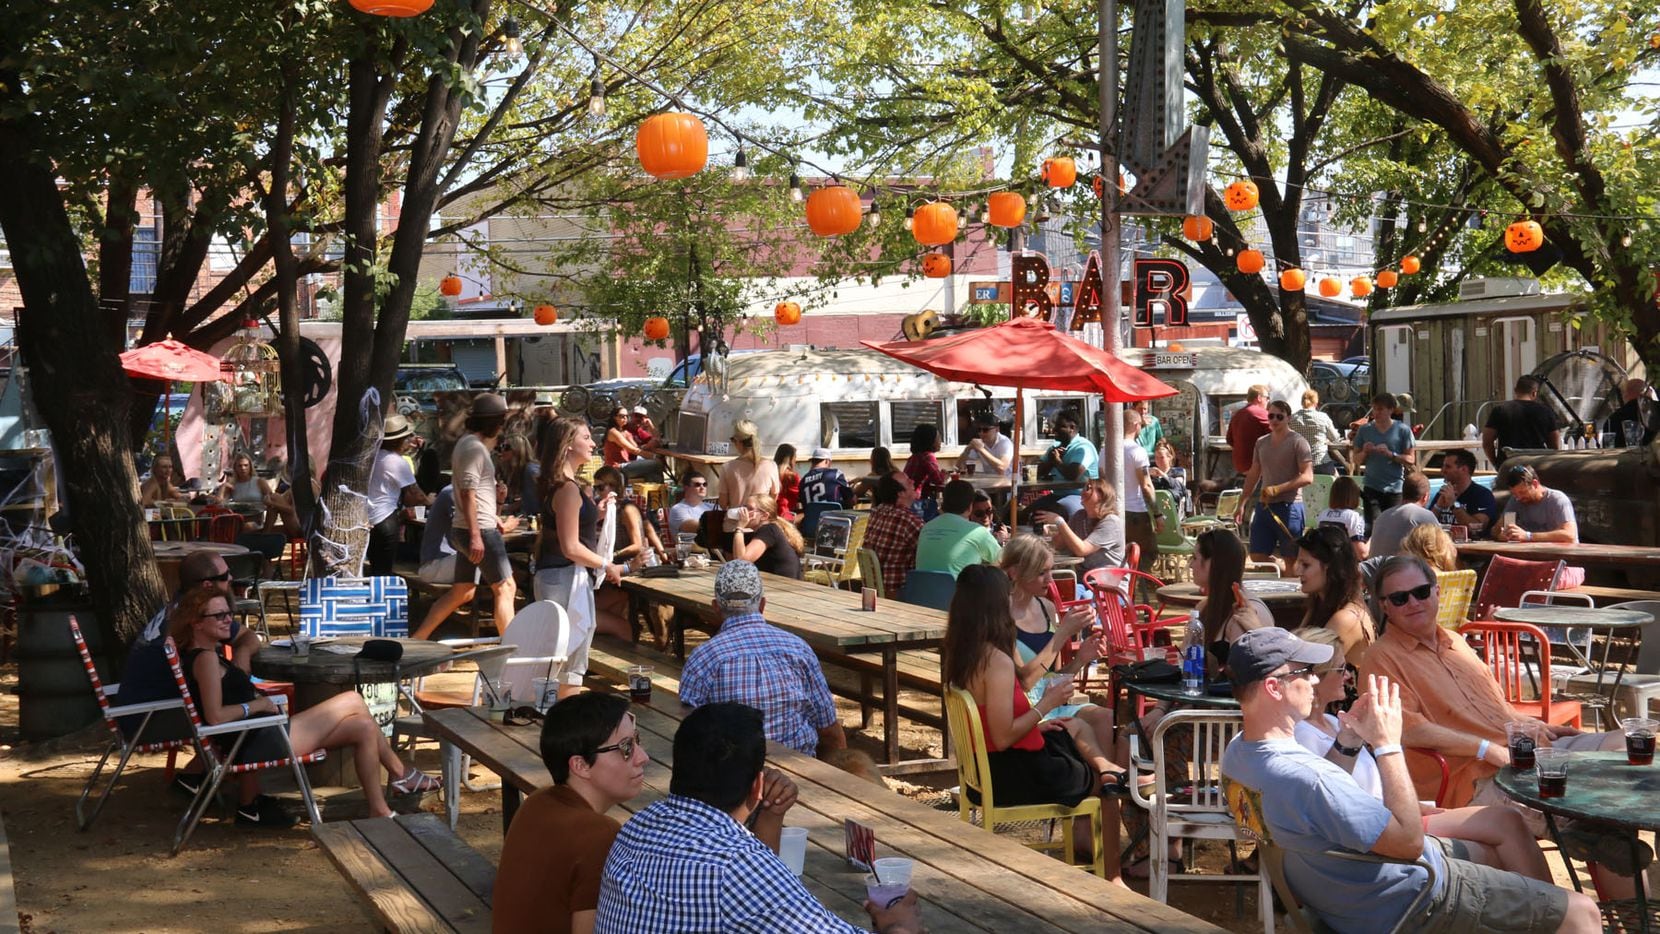 Truck Yard opened in Dallas in 2013 and has since grown to The Colony and Houston. A Truck...